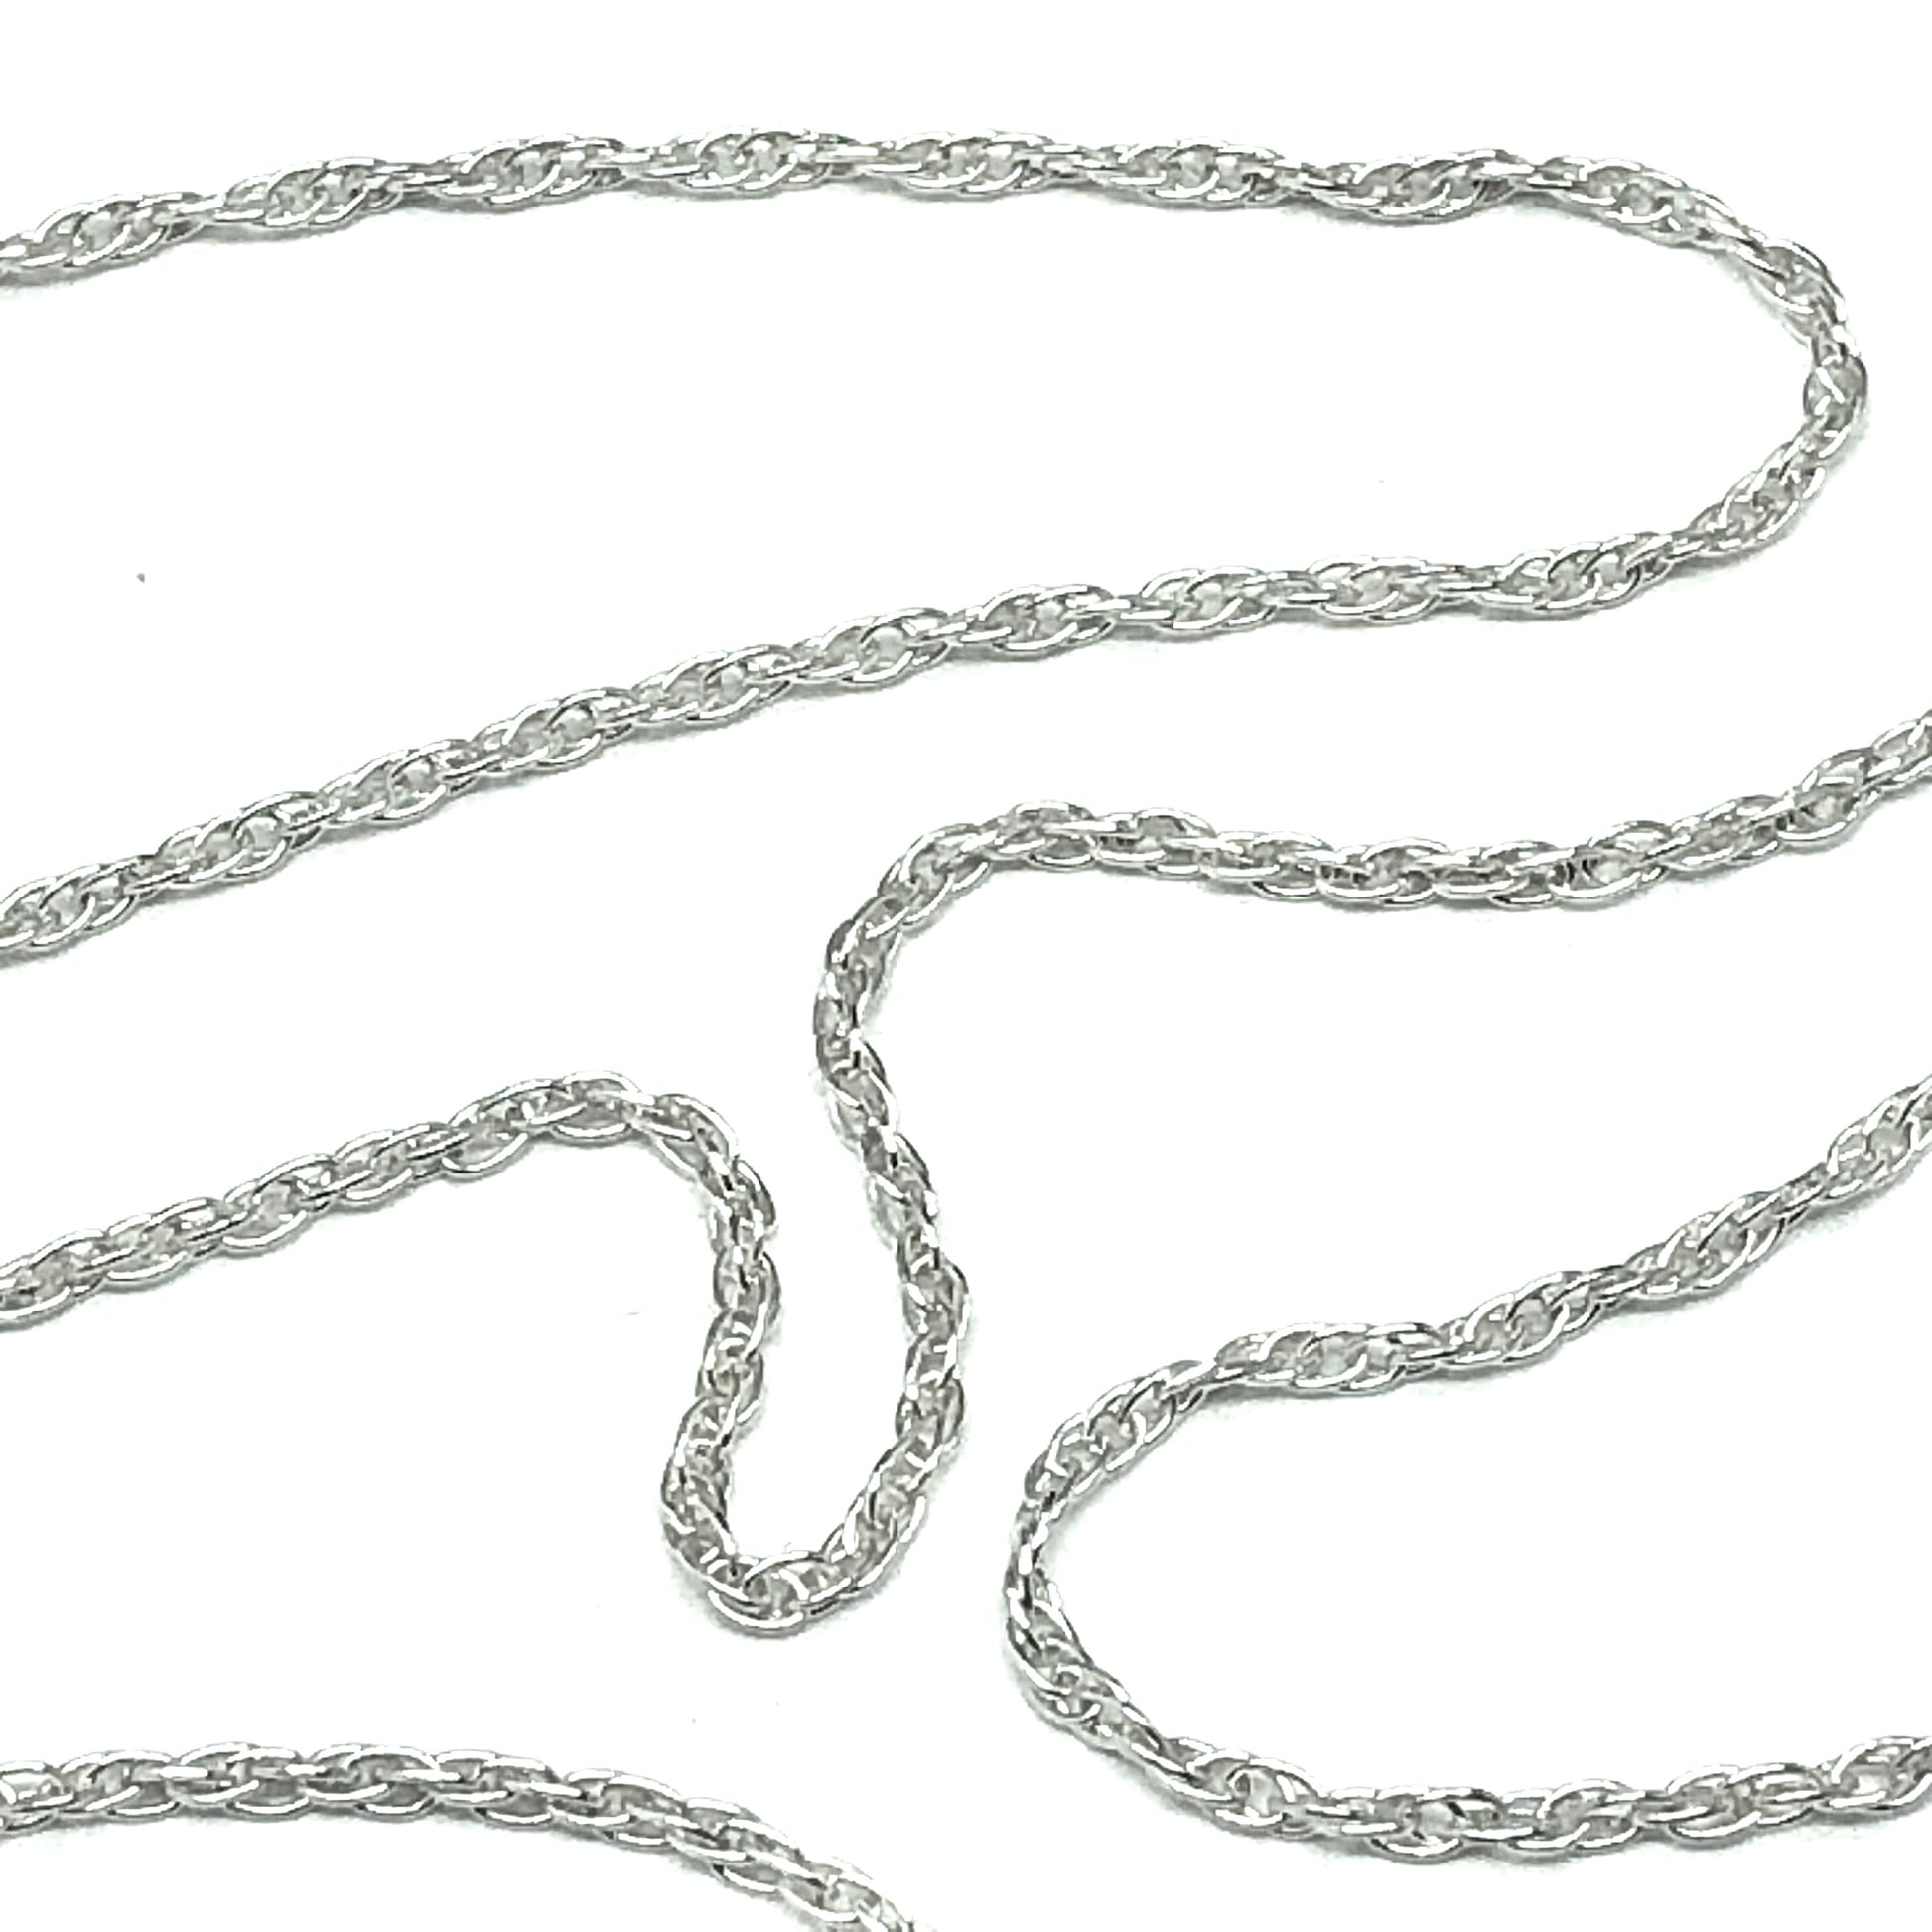 Womens Silver Necklaces | 24" Sterling 1.3mm Singapore Chain Necklace | Discount Overstock Jewelry online at Blingschlingers.com